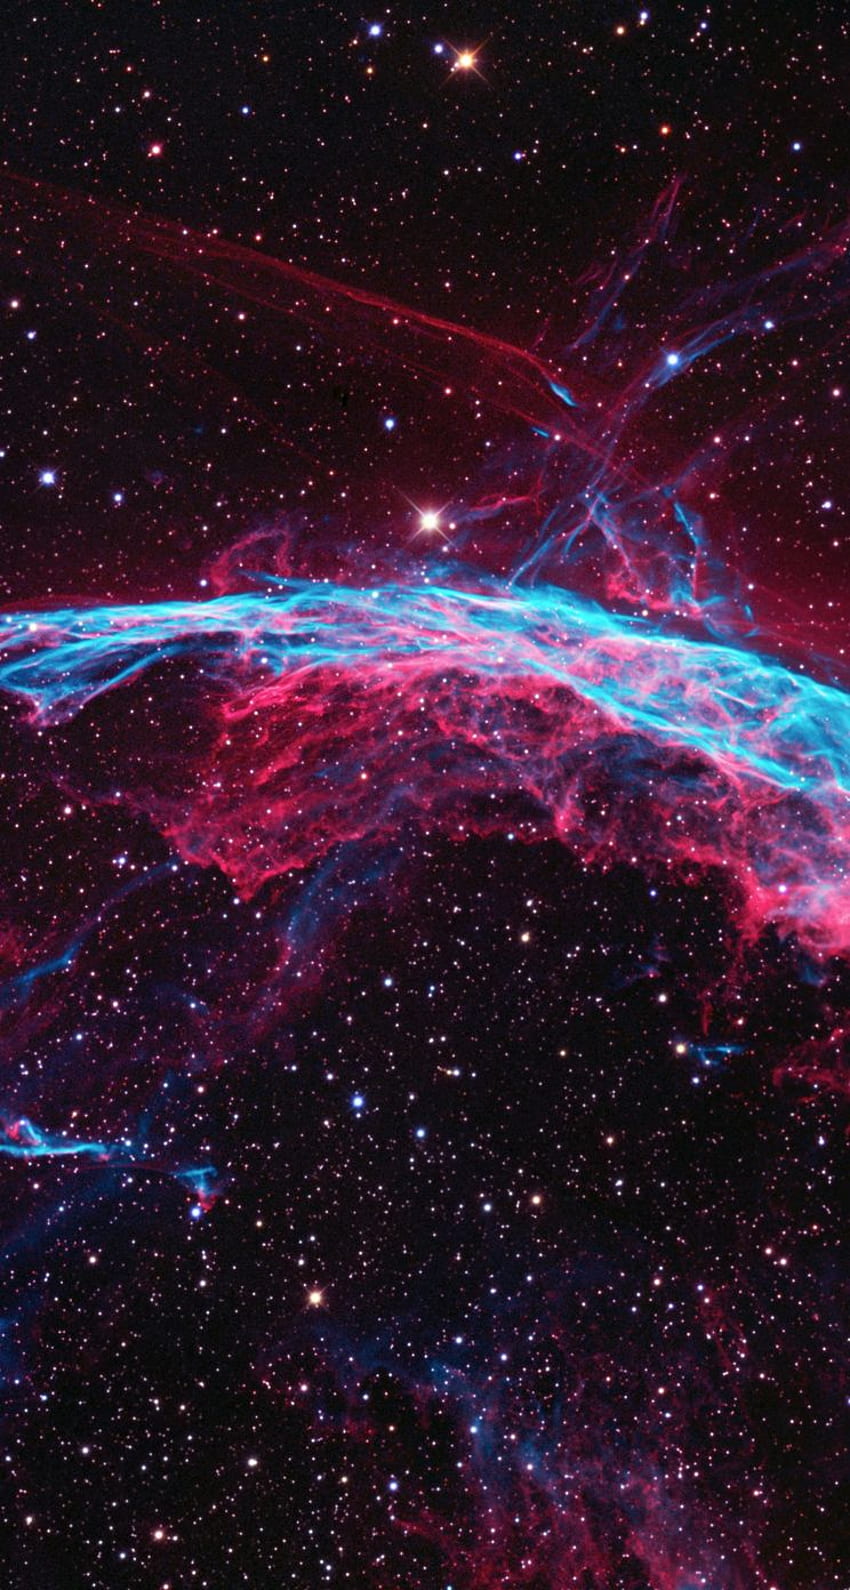 hd space wallpaper iphone 5